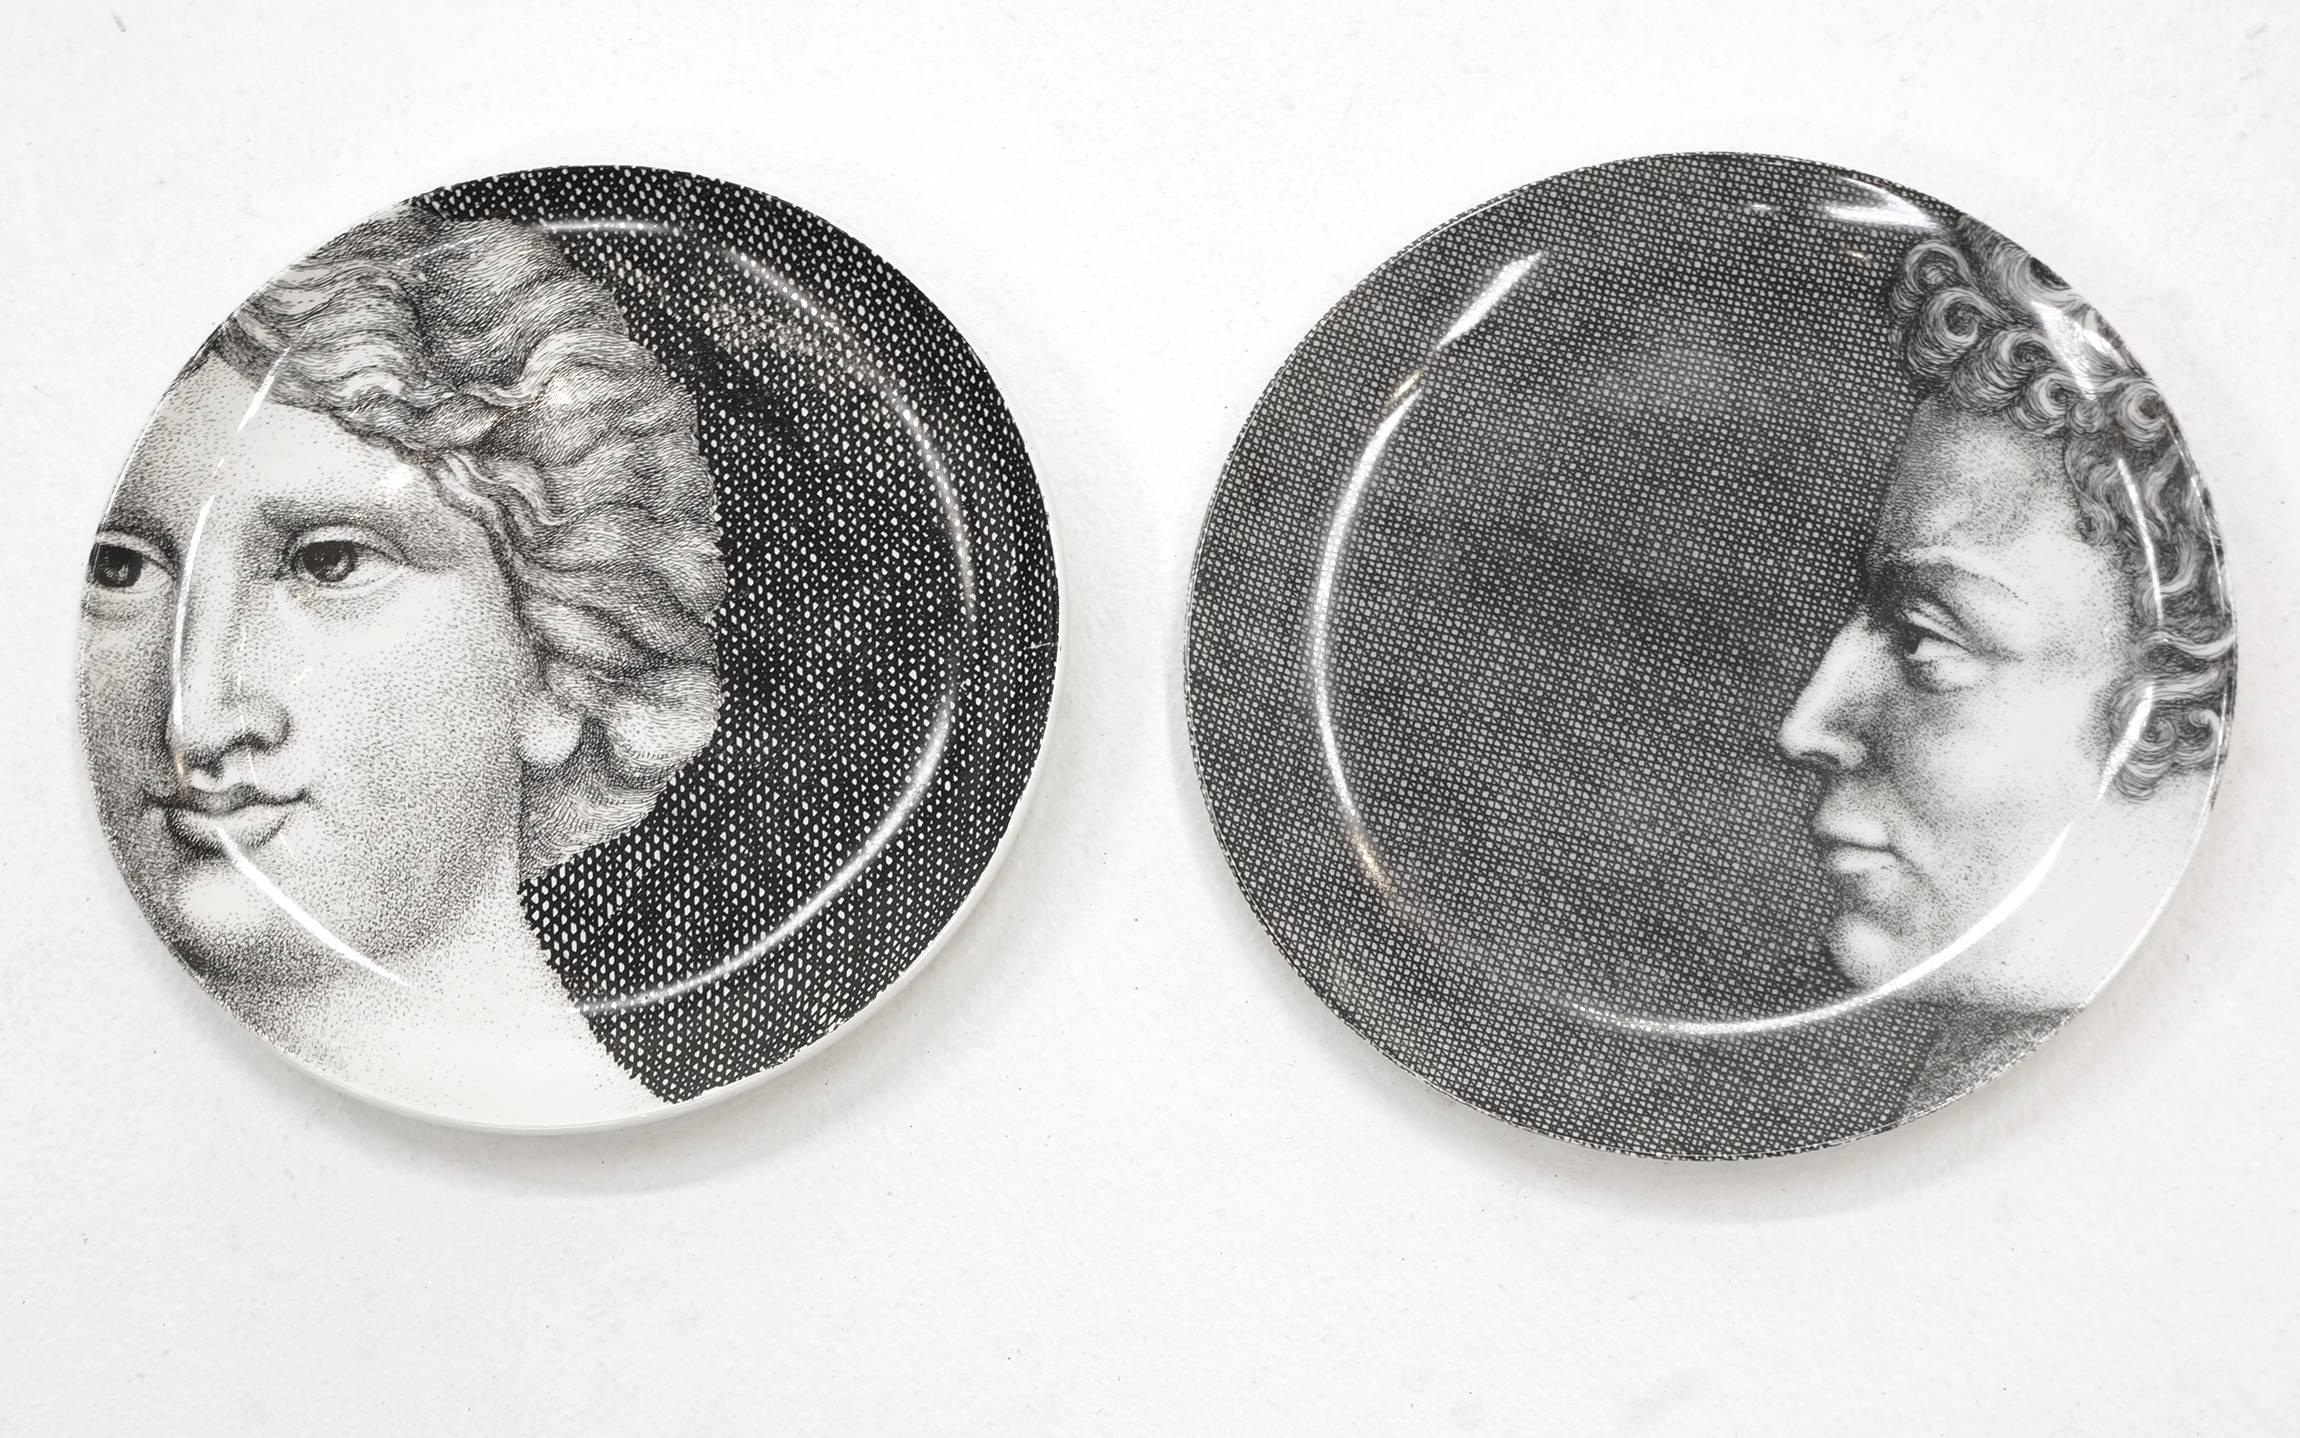 Early set of Piero Fornasetti Adam and Eve lithographic transfer-printed plates. Mint Condition.